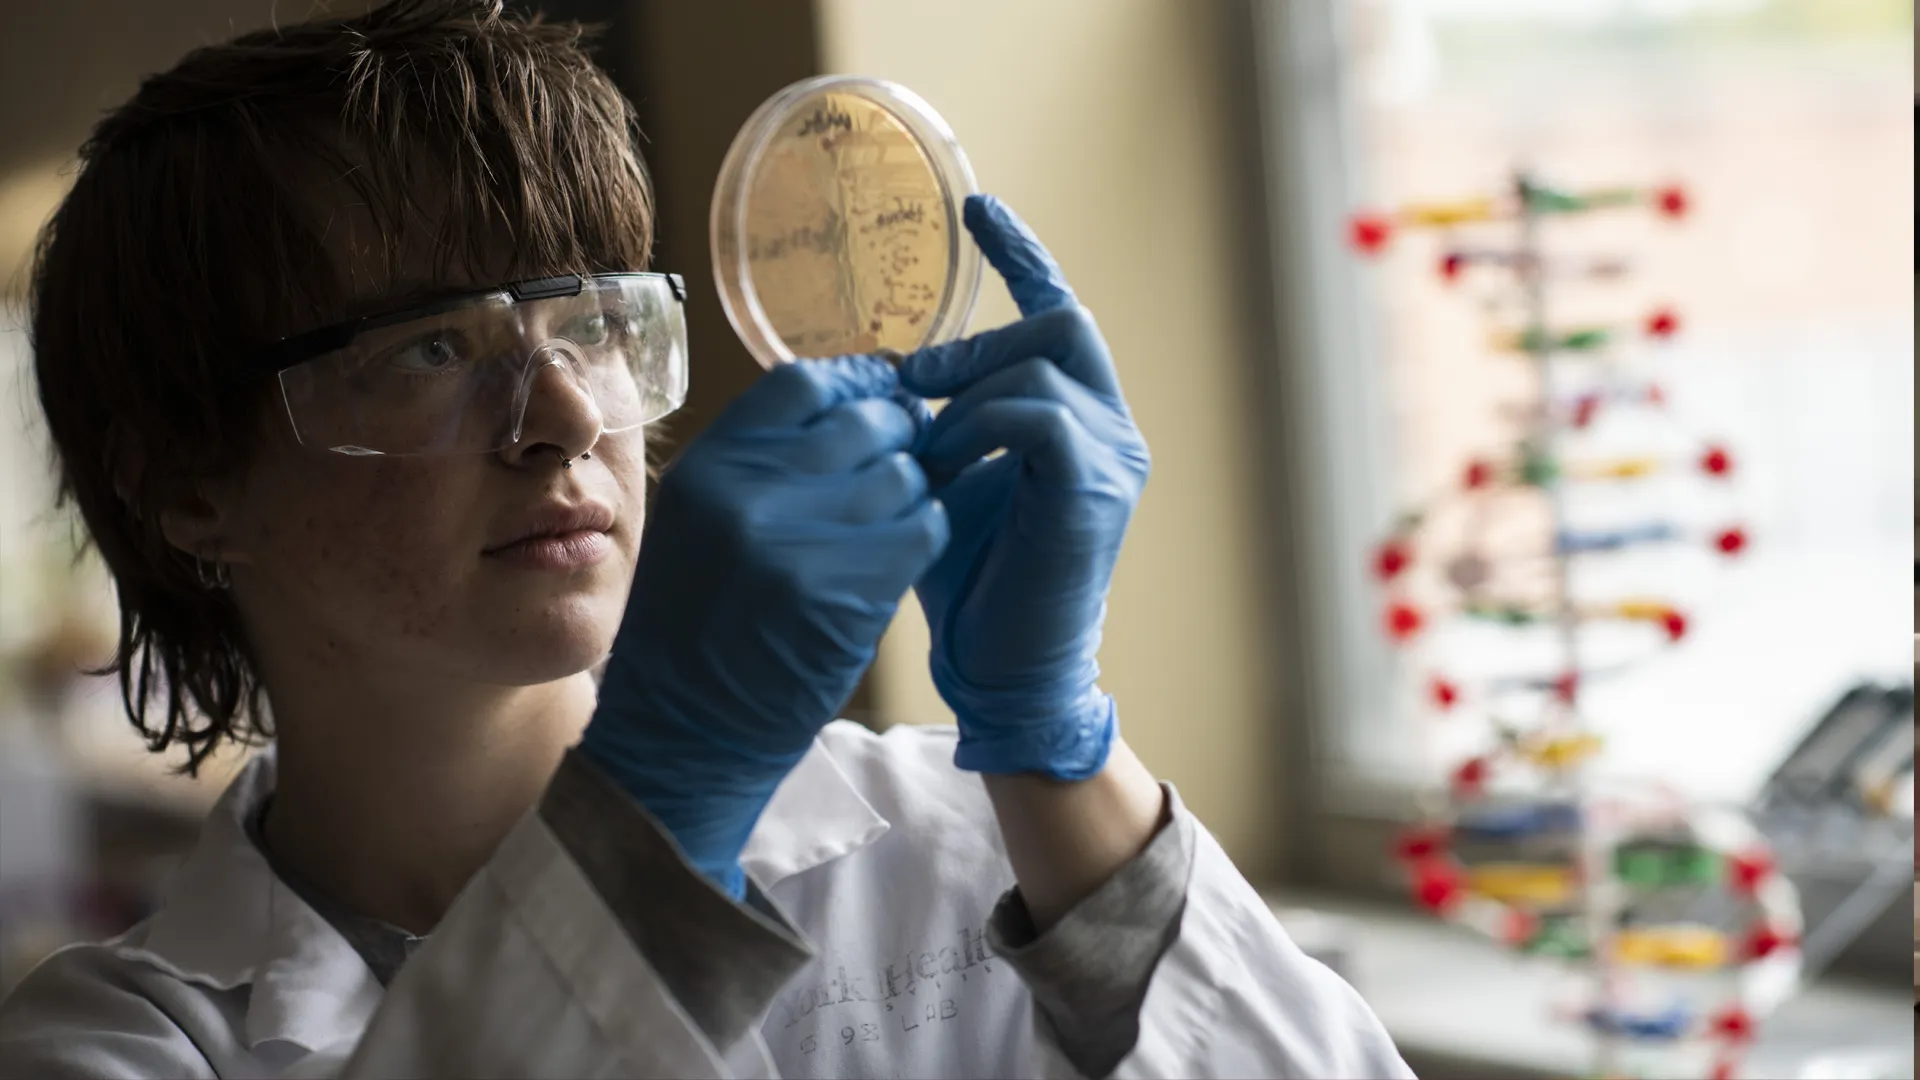 A student wearing gloves, safety goggles, and lab coat examines a petri dish